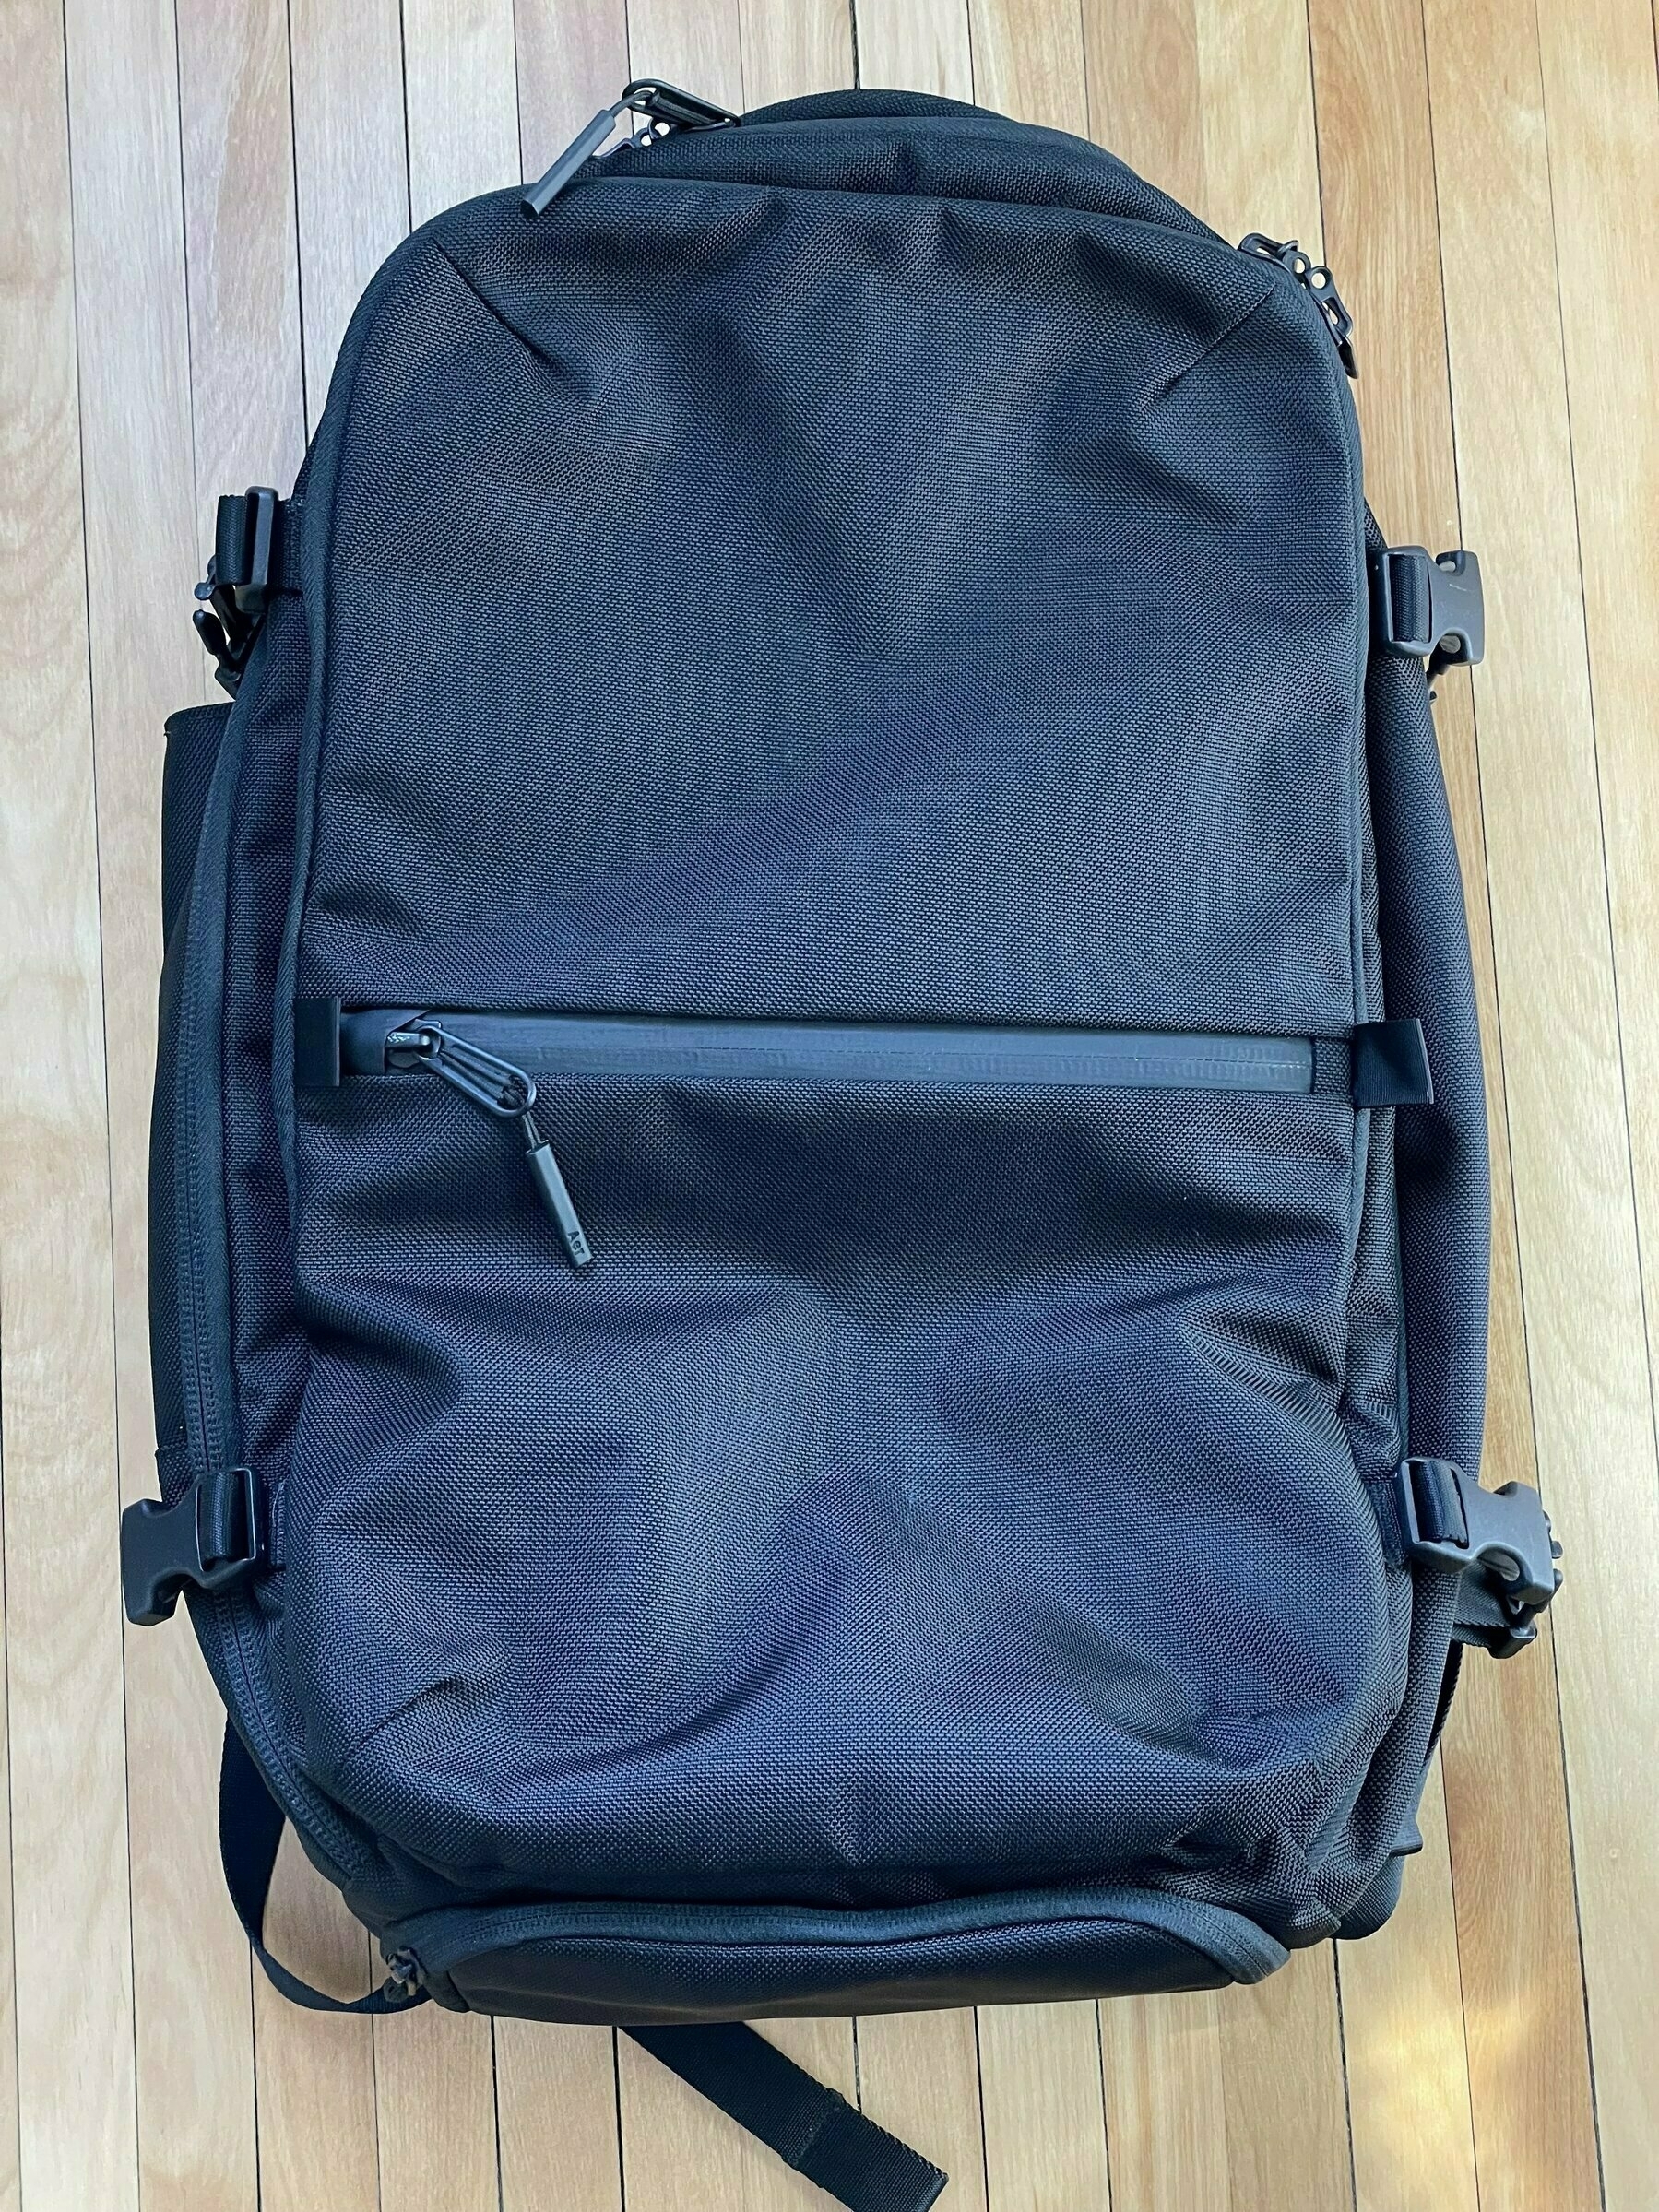 Aer Travel Pack 2 - A Very Good One Bag Travel Kit - Defiant Sloth